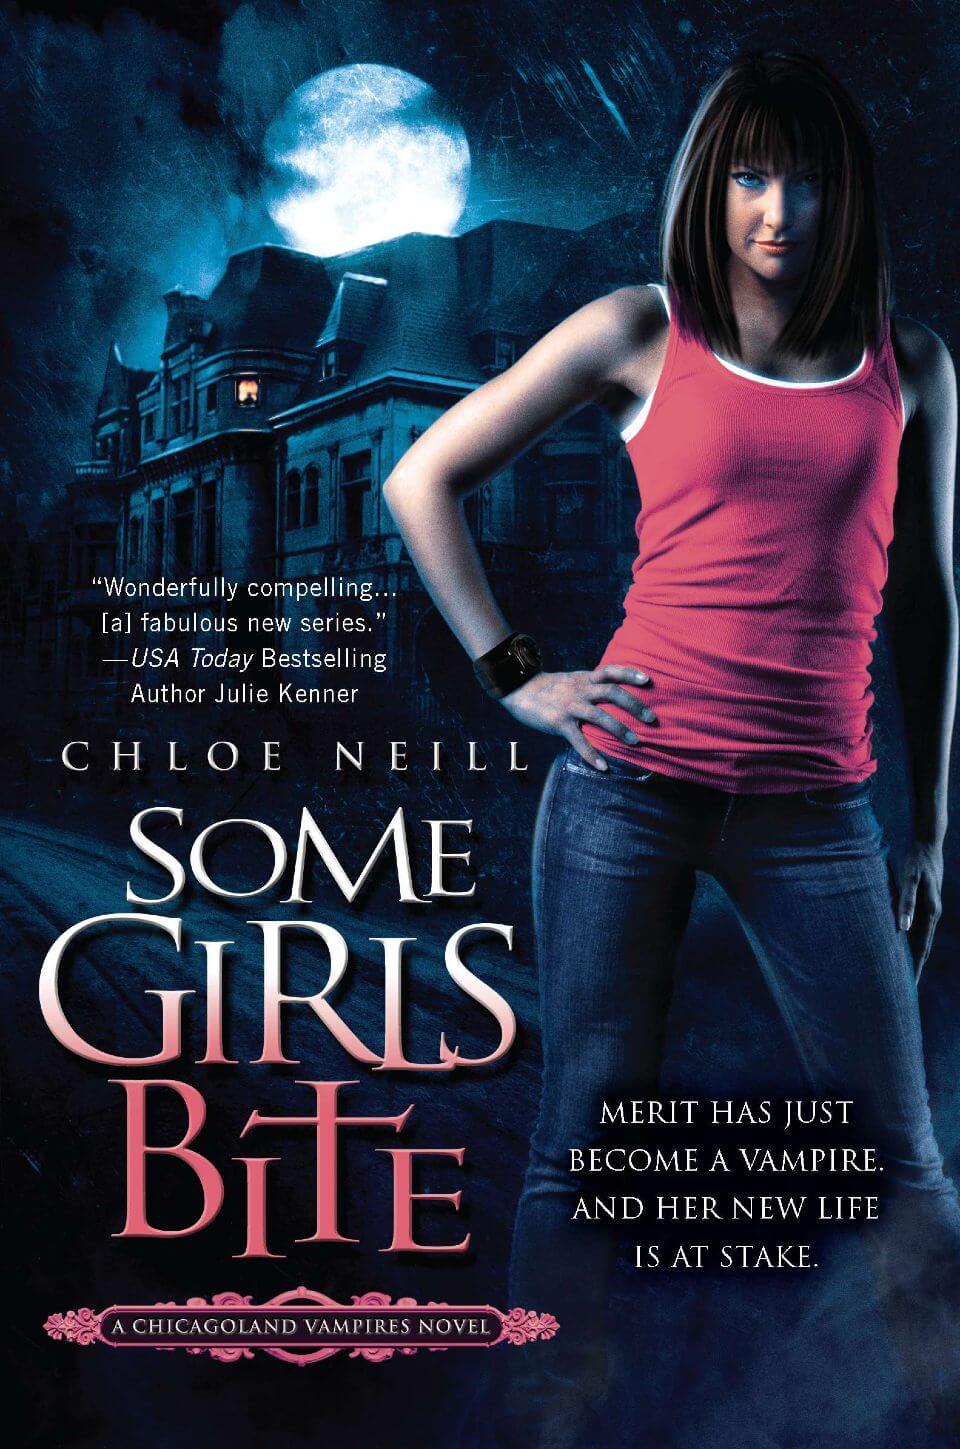 Some Girls Bite book cover